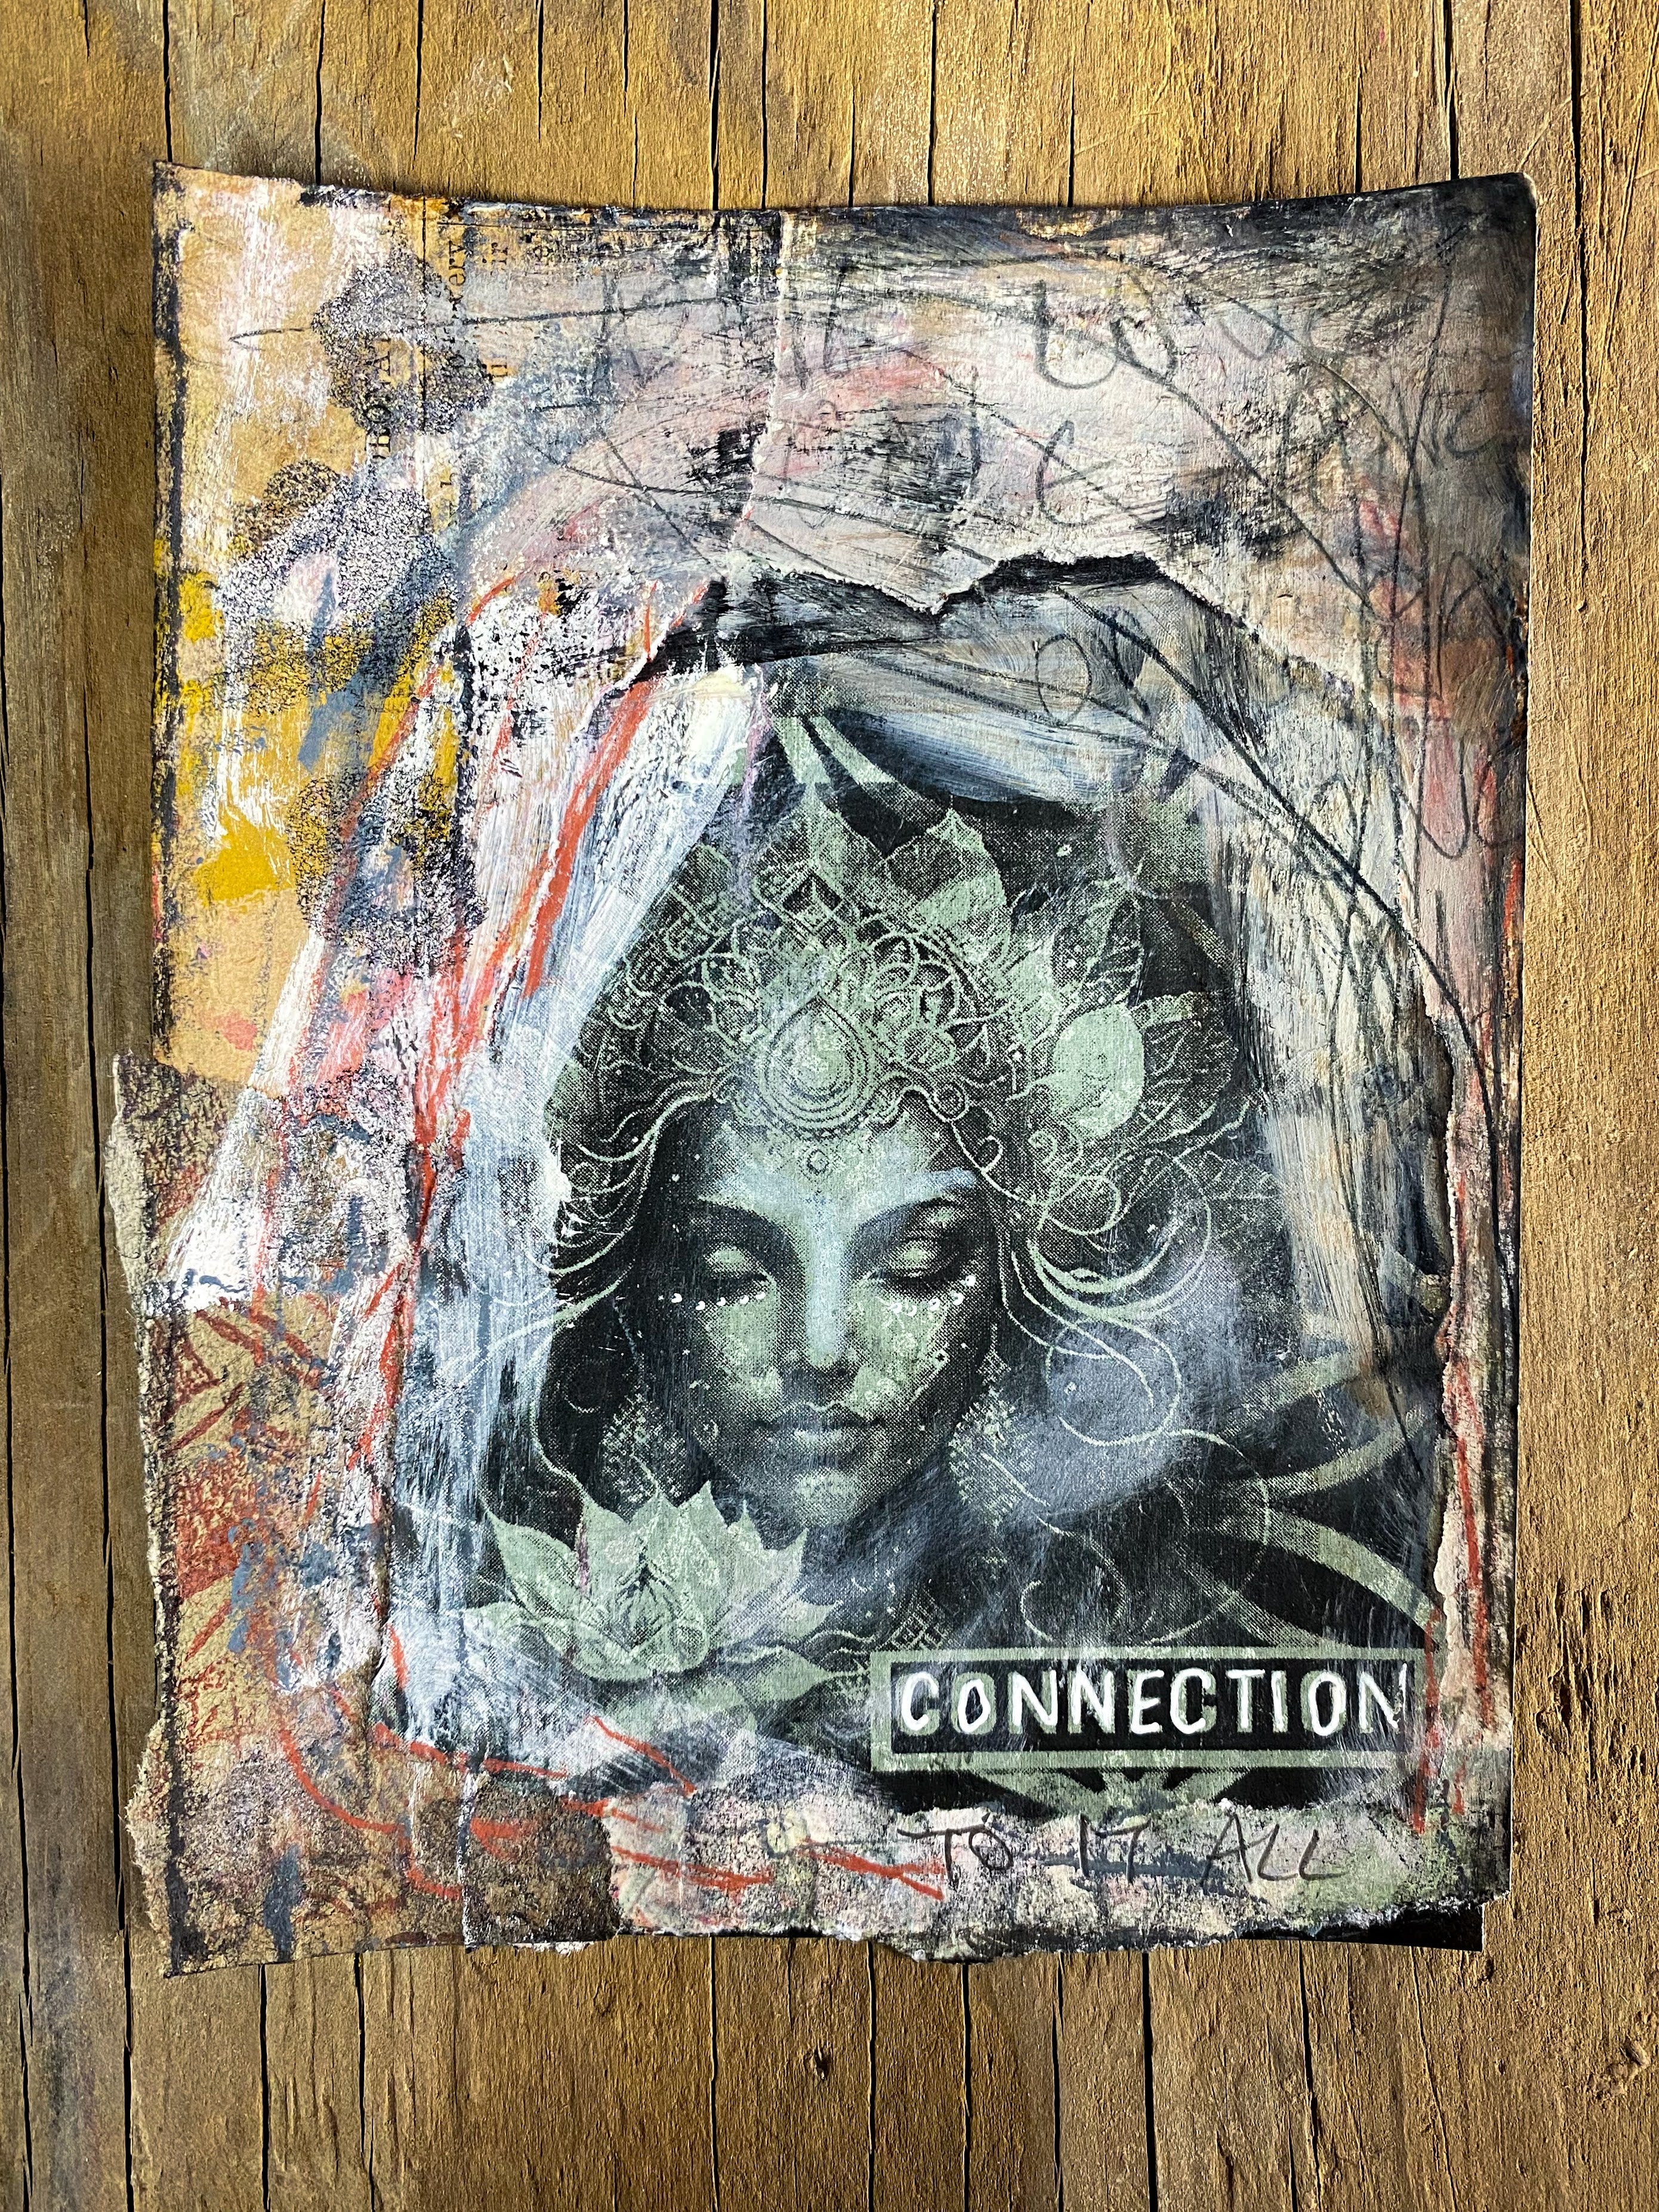 Connection - Original Mixed Media Collage